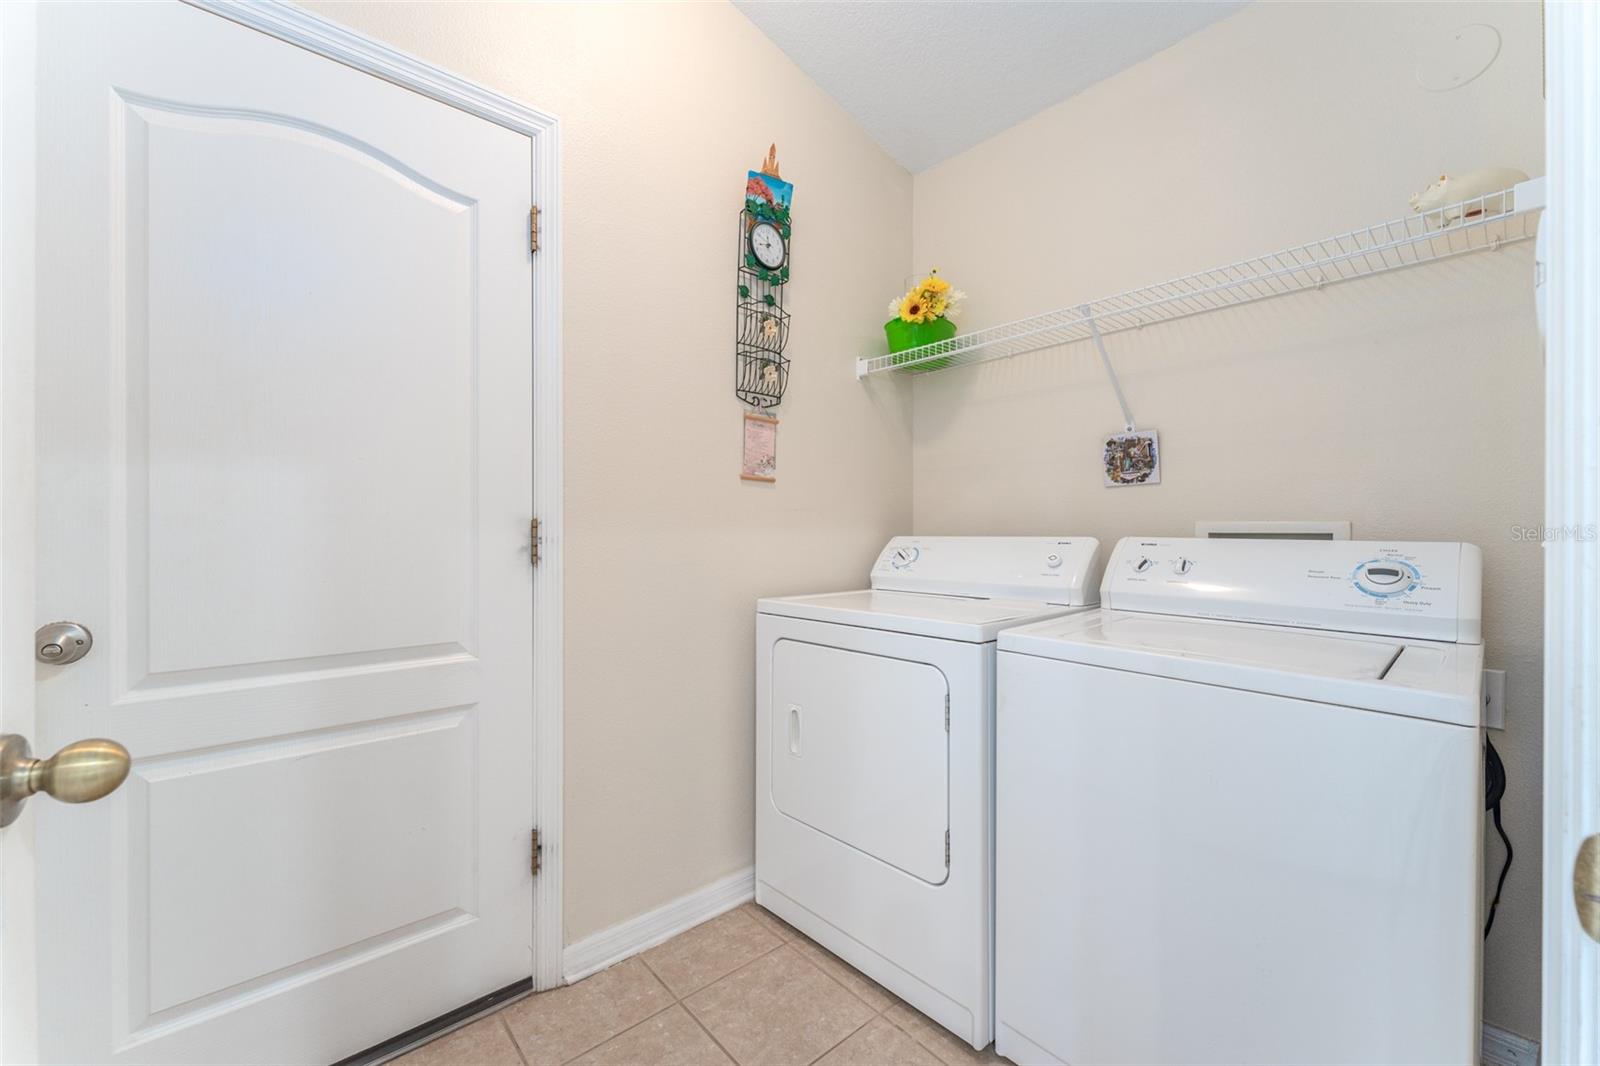 Laundry Room - Washer and Dryer Convey